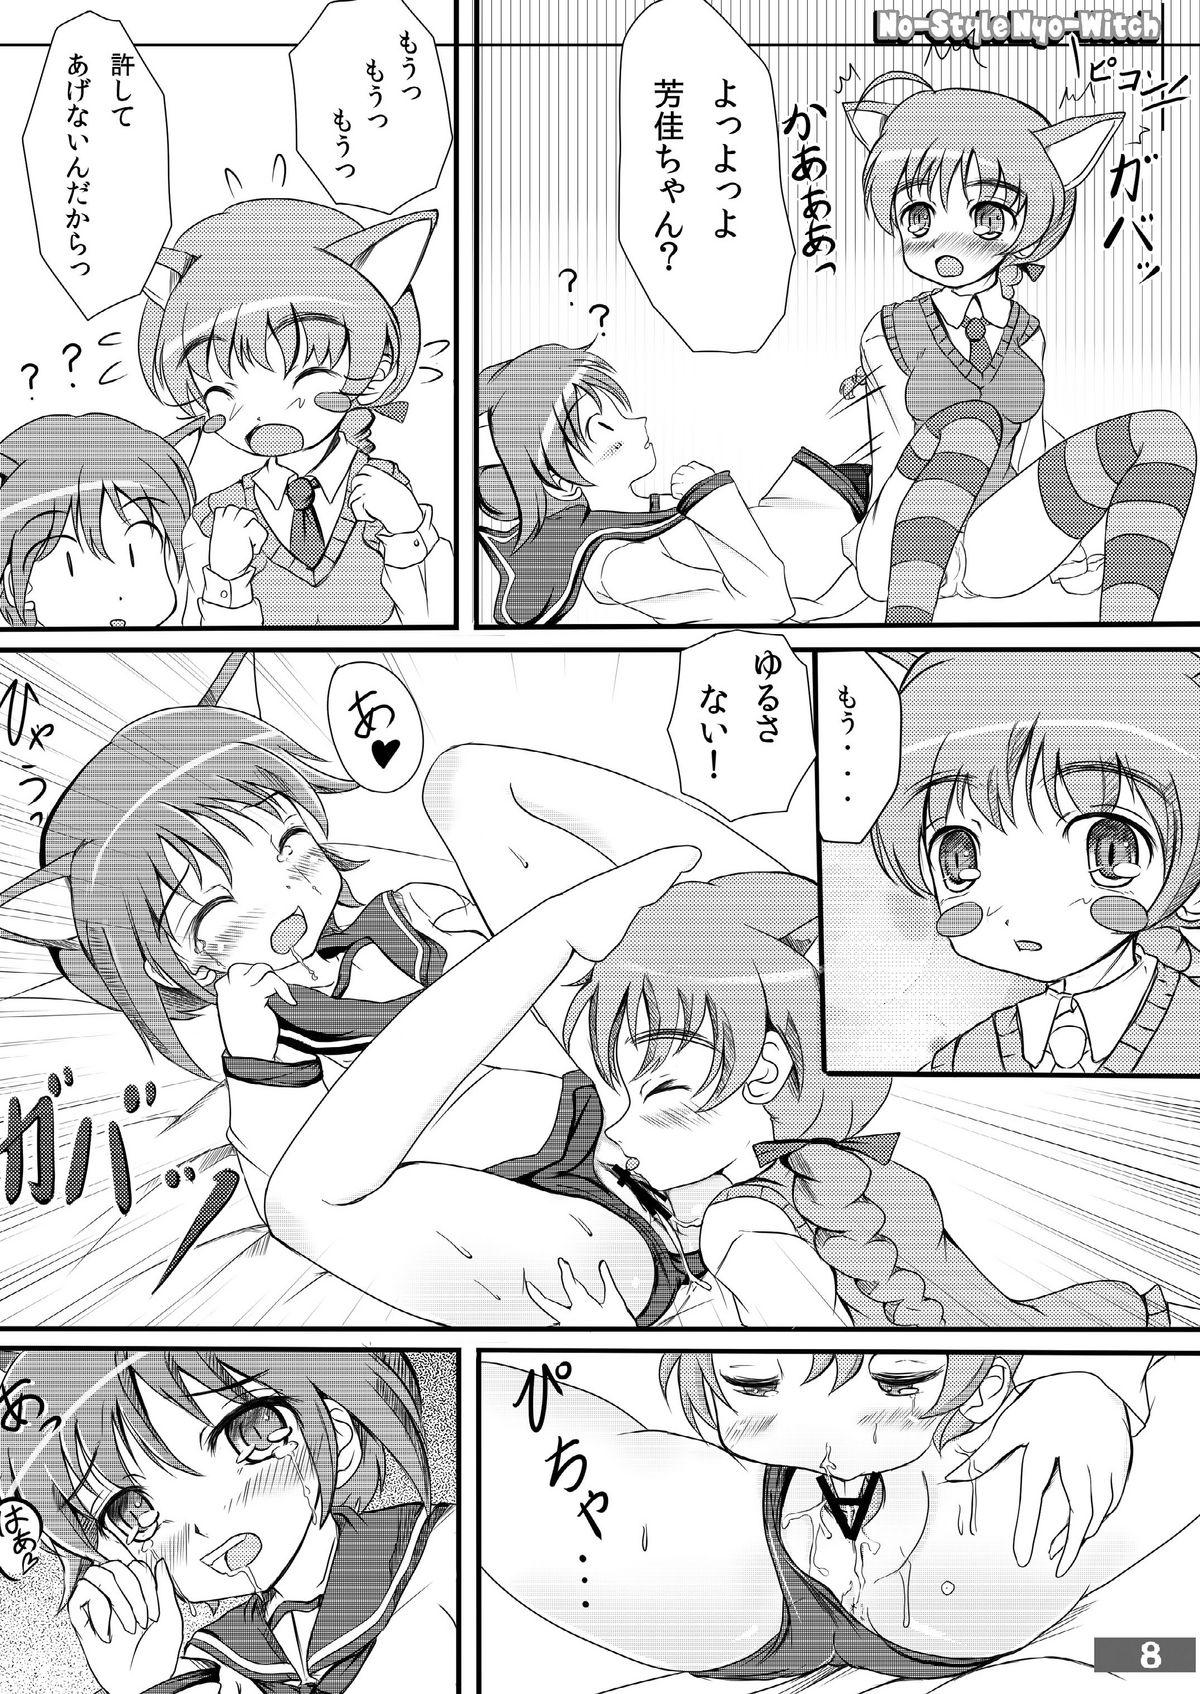 Bigcock (C79) [kyabe's FACTORY (Kyabe Suke)] No-Style Nyo-Witch (Strike Witches) - Strike witches Rough Sex - Page 8